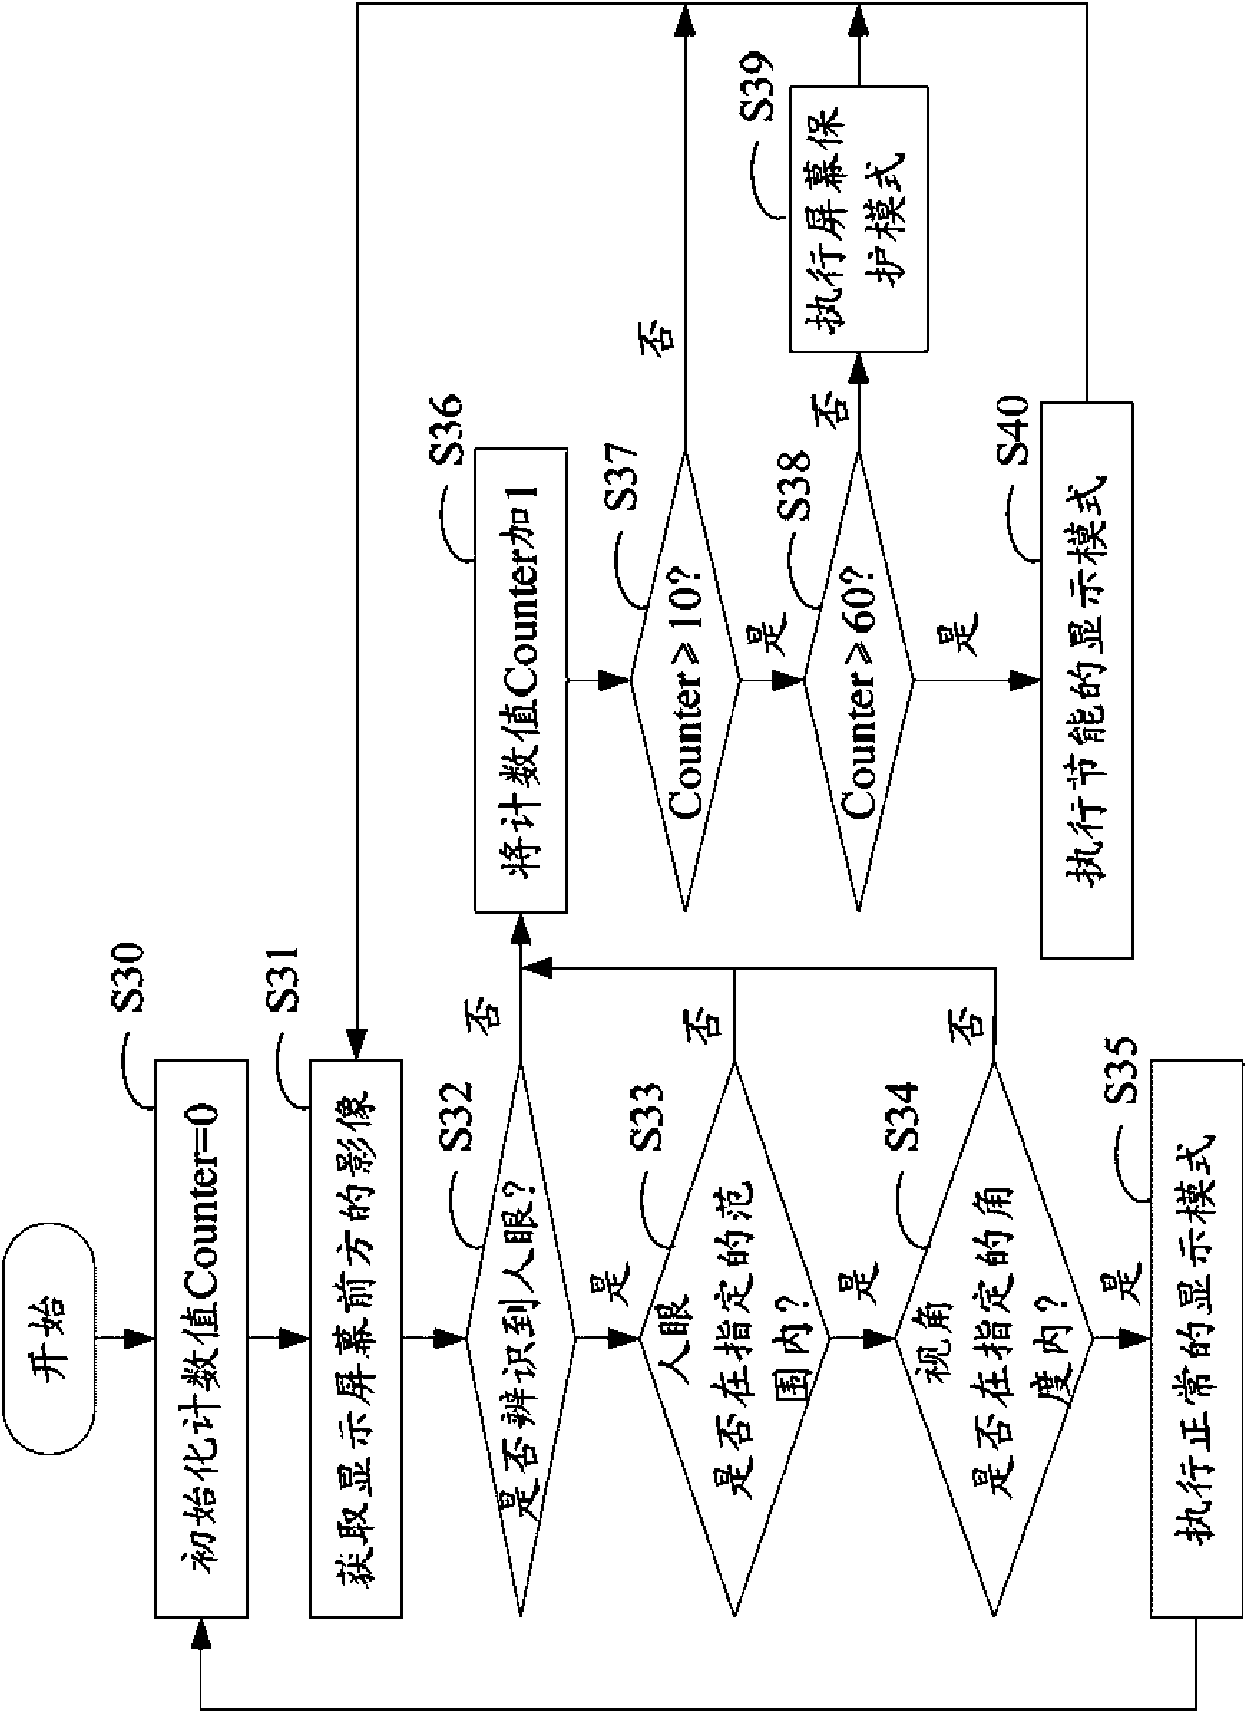 Energy saving system and method for screen display